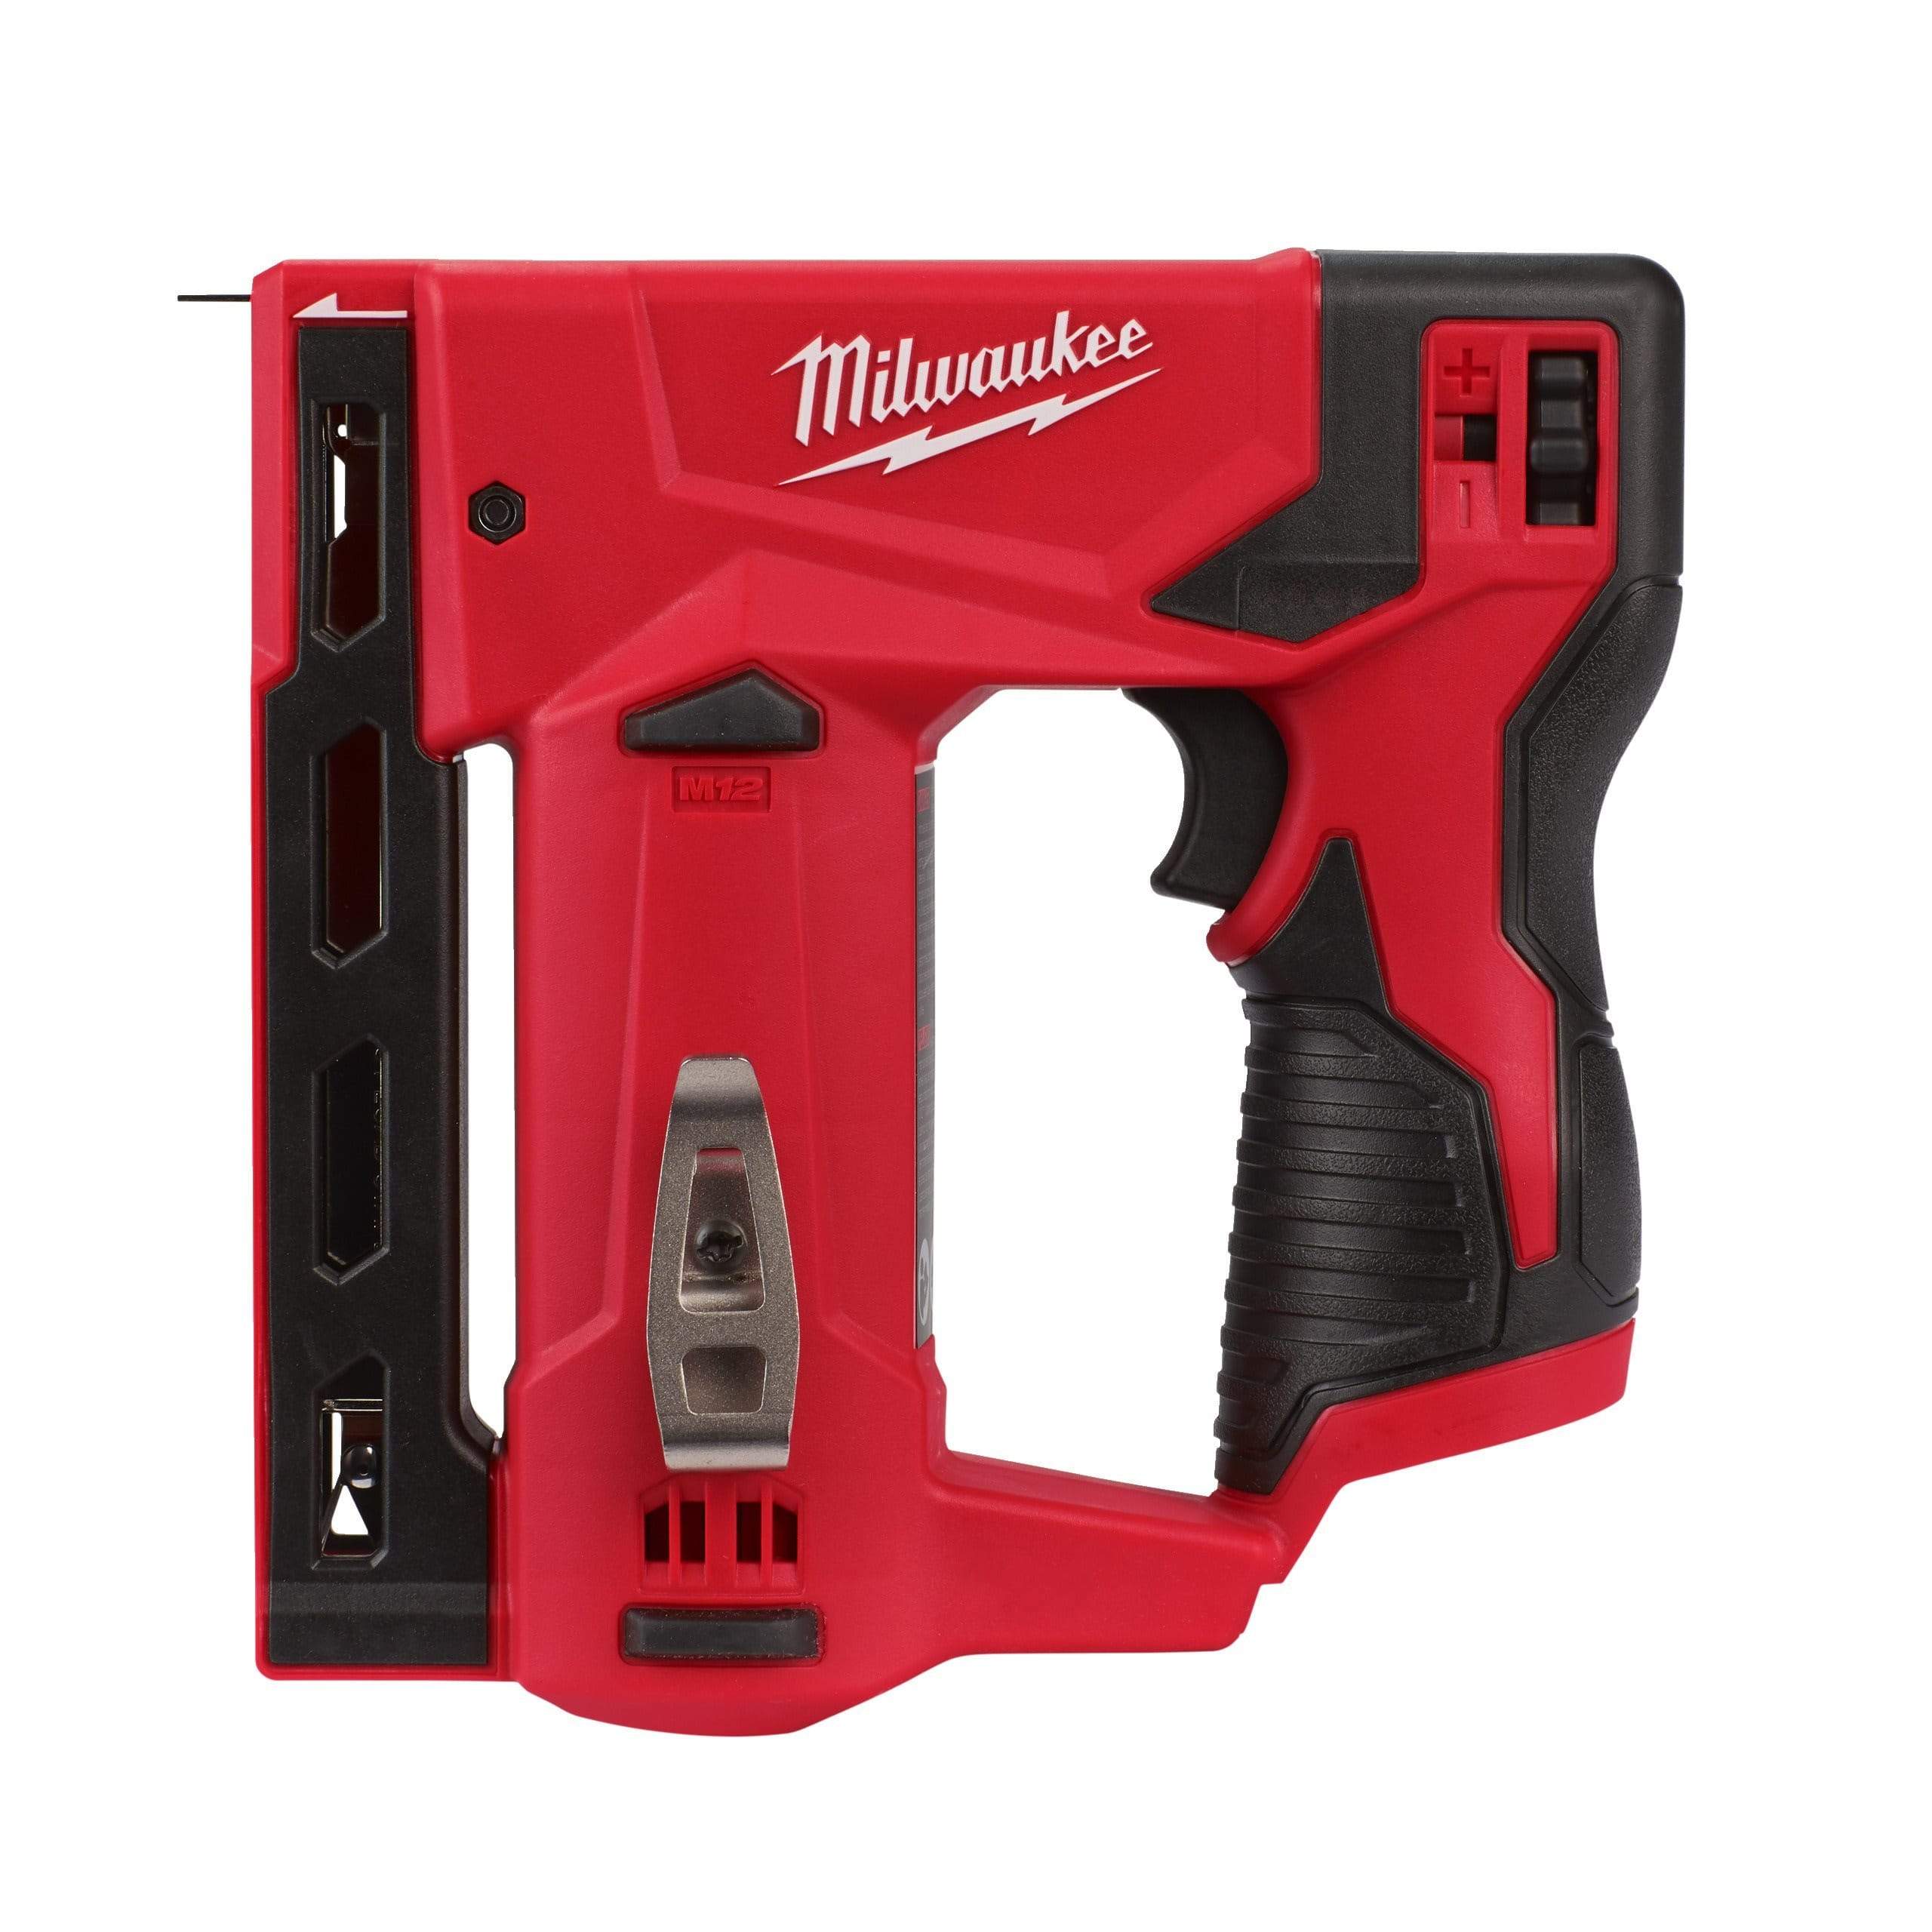 Milwaukee M12™ Cordless 6mm Compact Drain Cleaner 12V - M12 BDC6-202C | Supply Master | Accra, Ghana Tools Building Steel Engineering Hardware tool